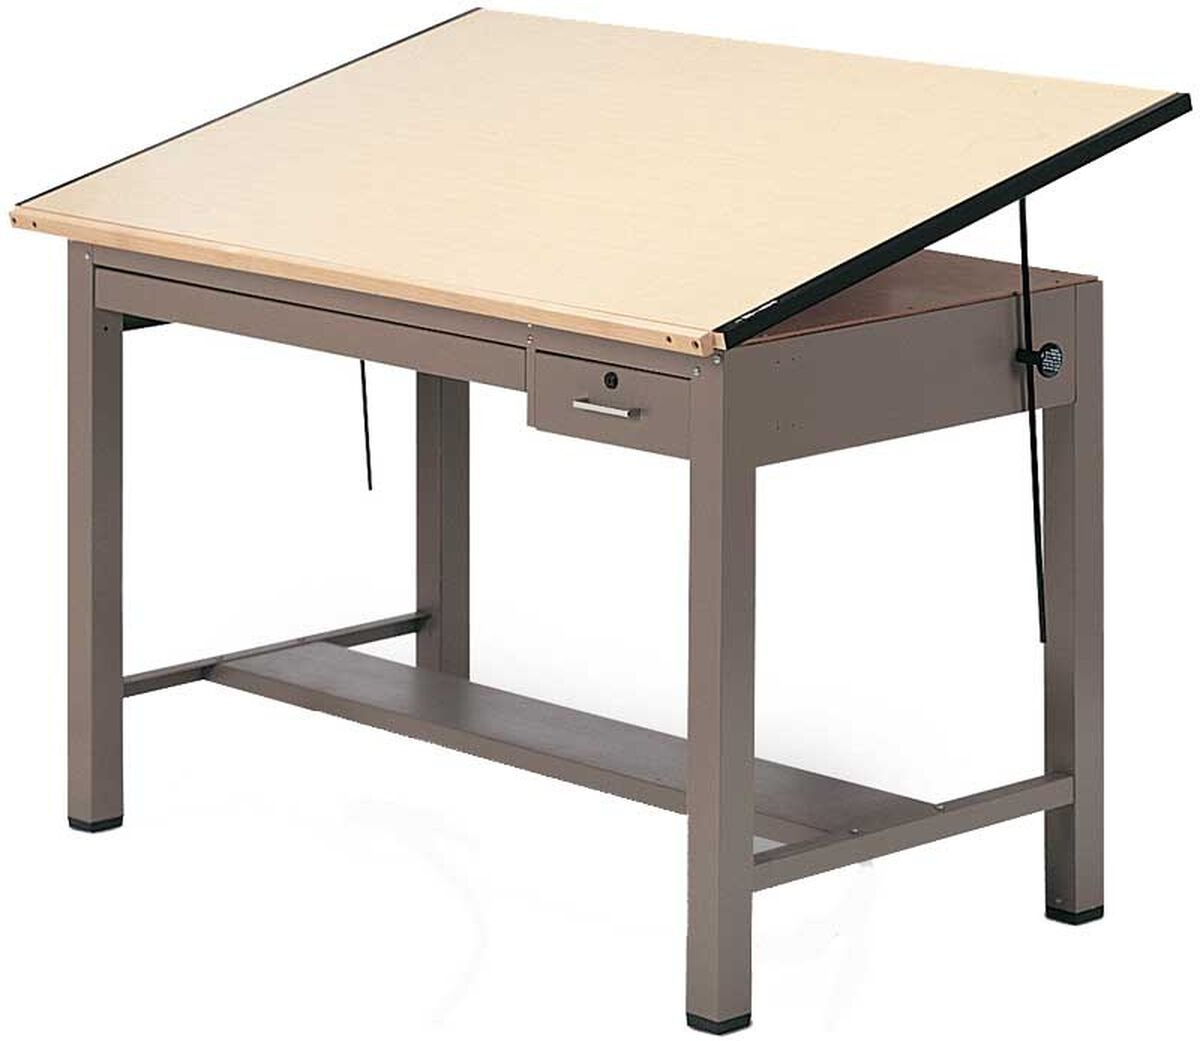 Mayline Ranger Steel Four-Post Drafting Table with Tool & Plan Drawers, 72" W x 37.5" D (7737B - Desert Sage Base, Birch Top)